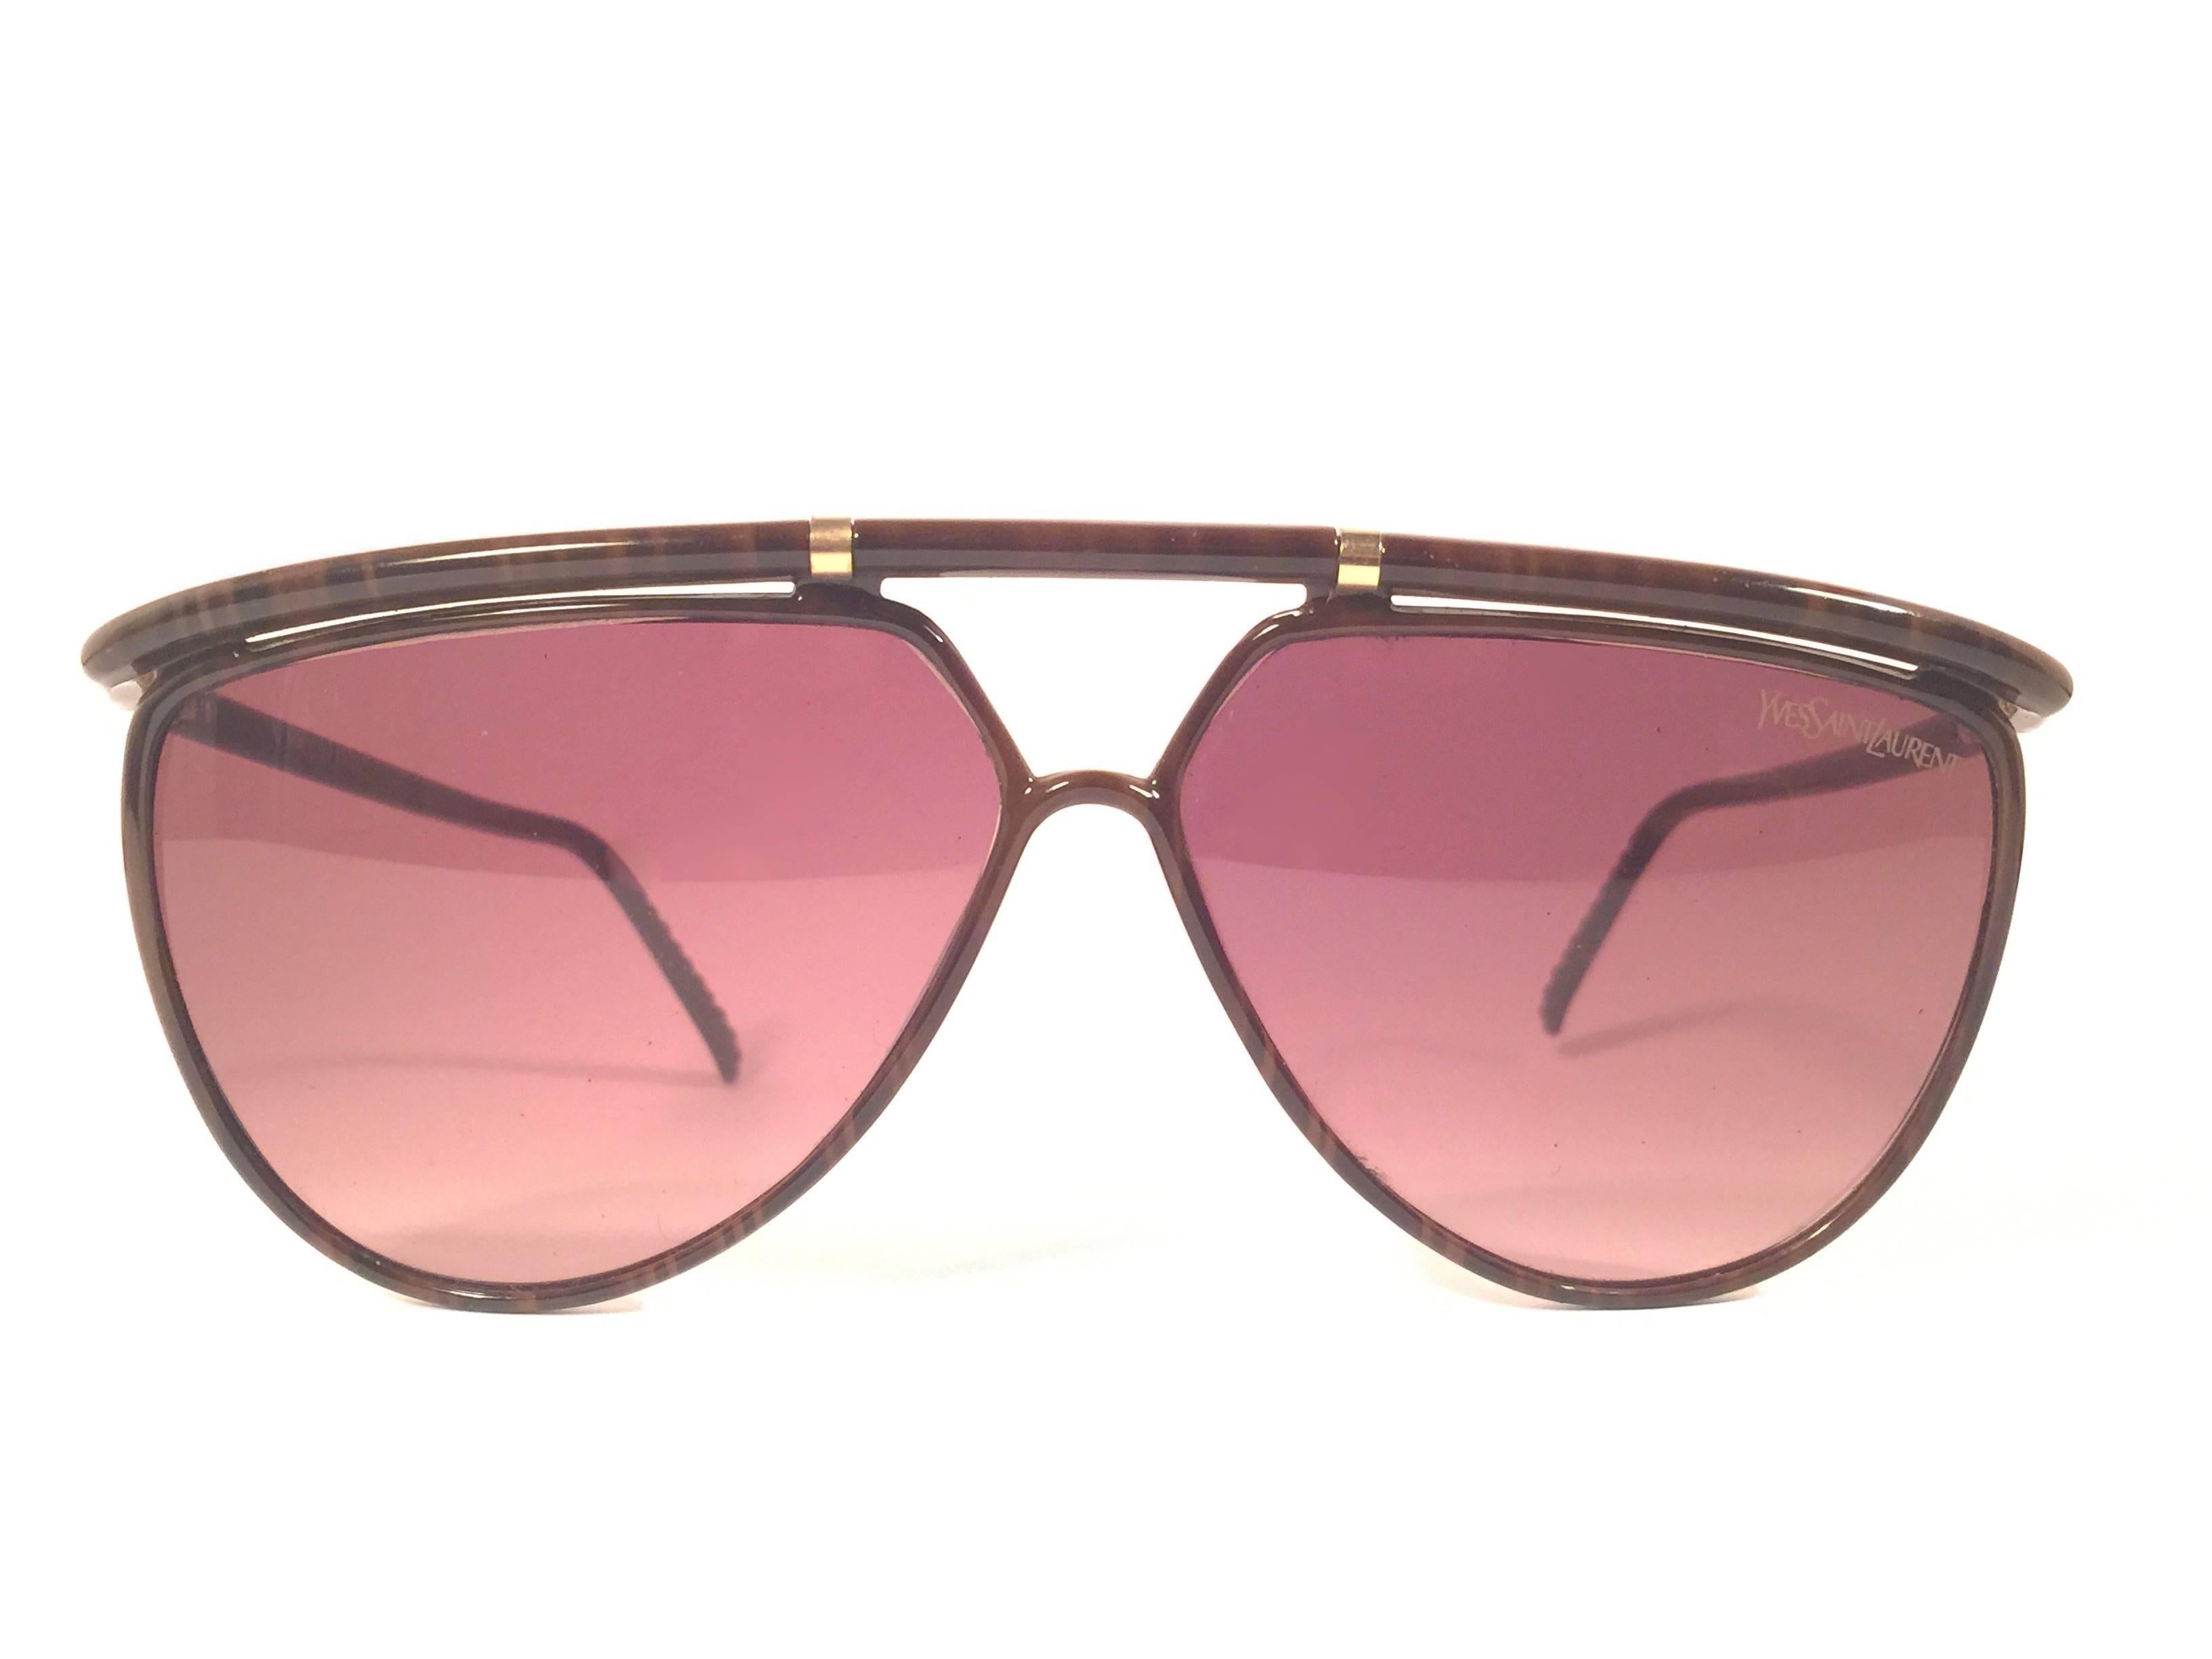 Super cool vintage new Yves Saint Laurent 1980’s sunglasses in a super classy jasped brown frame with an spotless pair of solid brown lenses.

New! never worn or displayed.  Flawless pair!!! comes with its original ysl sleeve.

This pair is an style